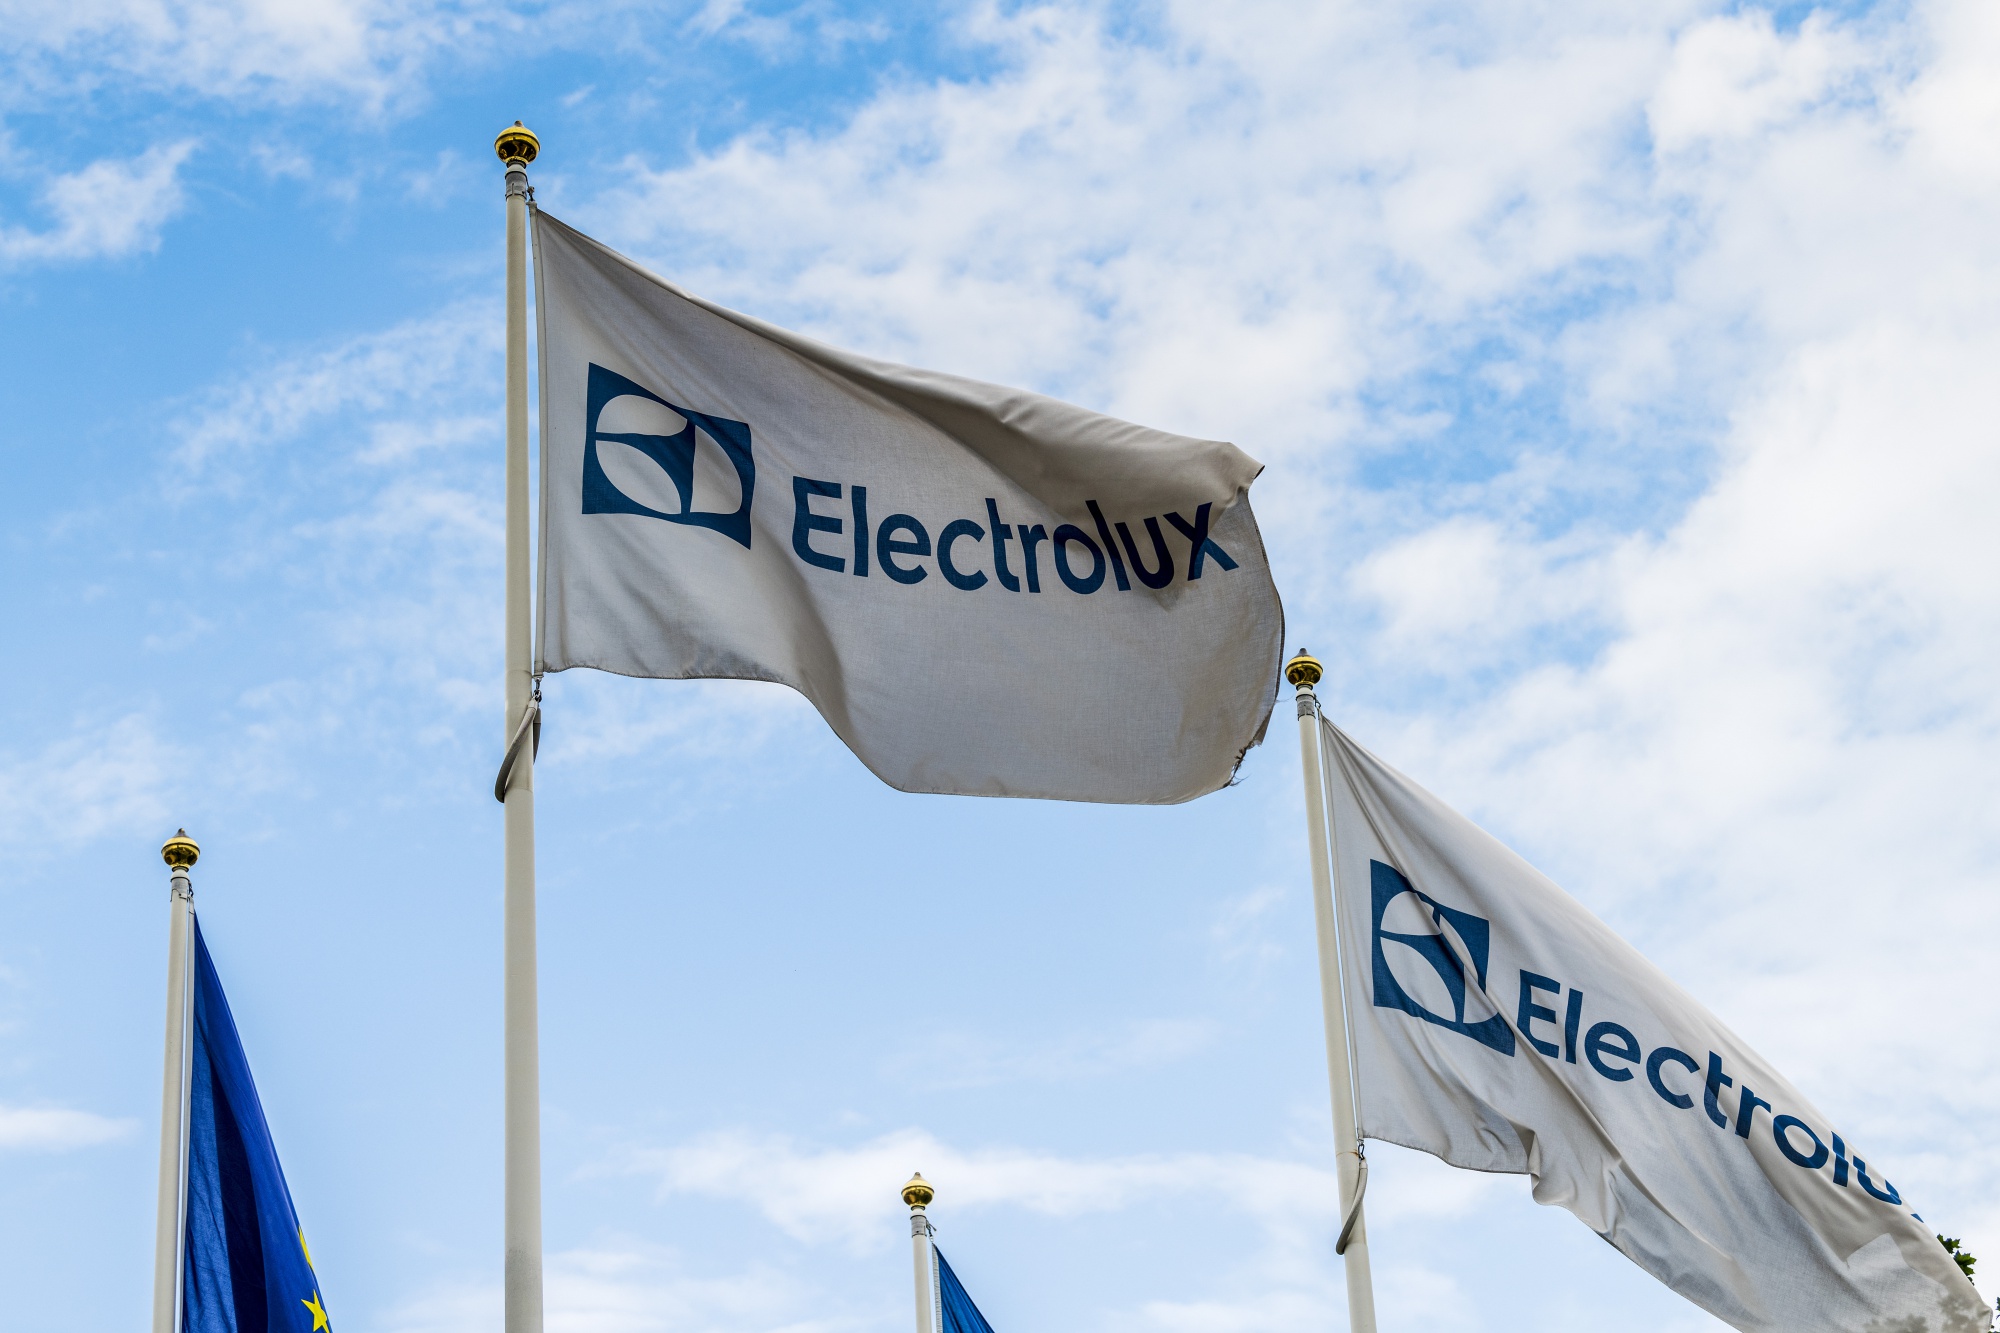 Electrolux Group Headquarters – Electrolux Group